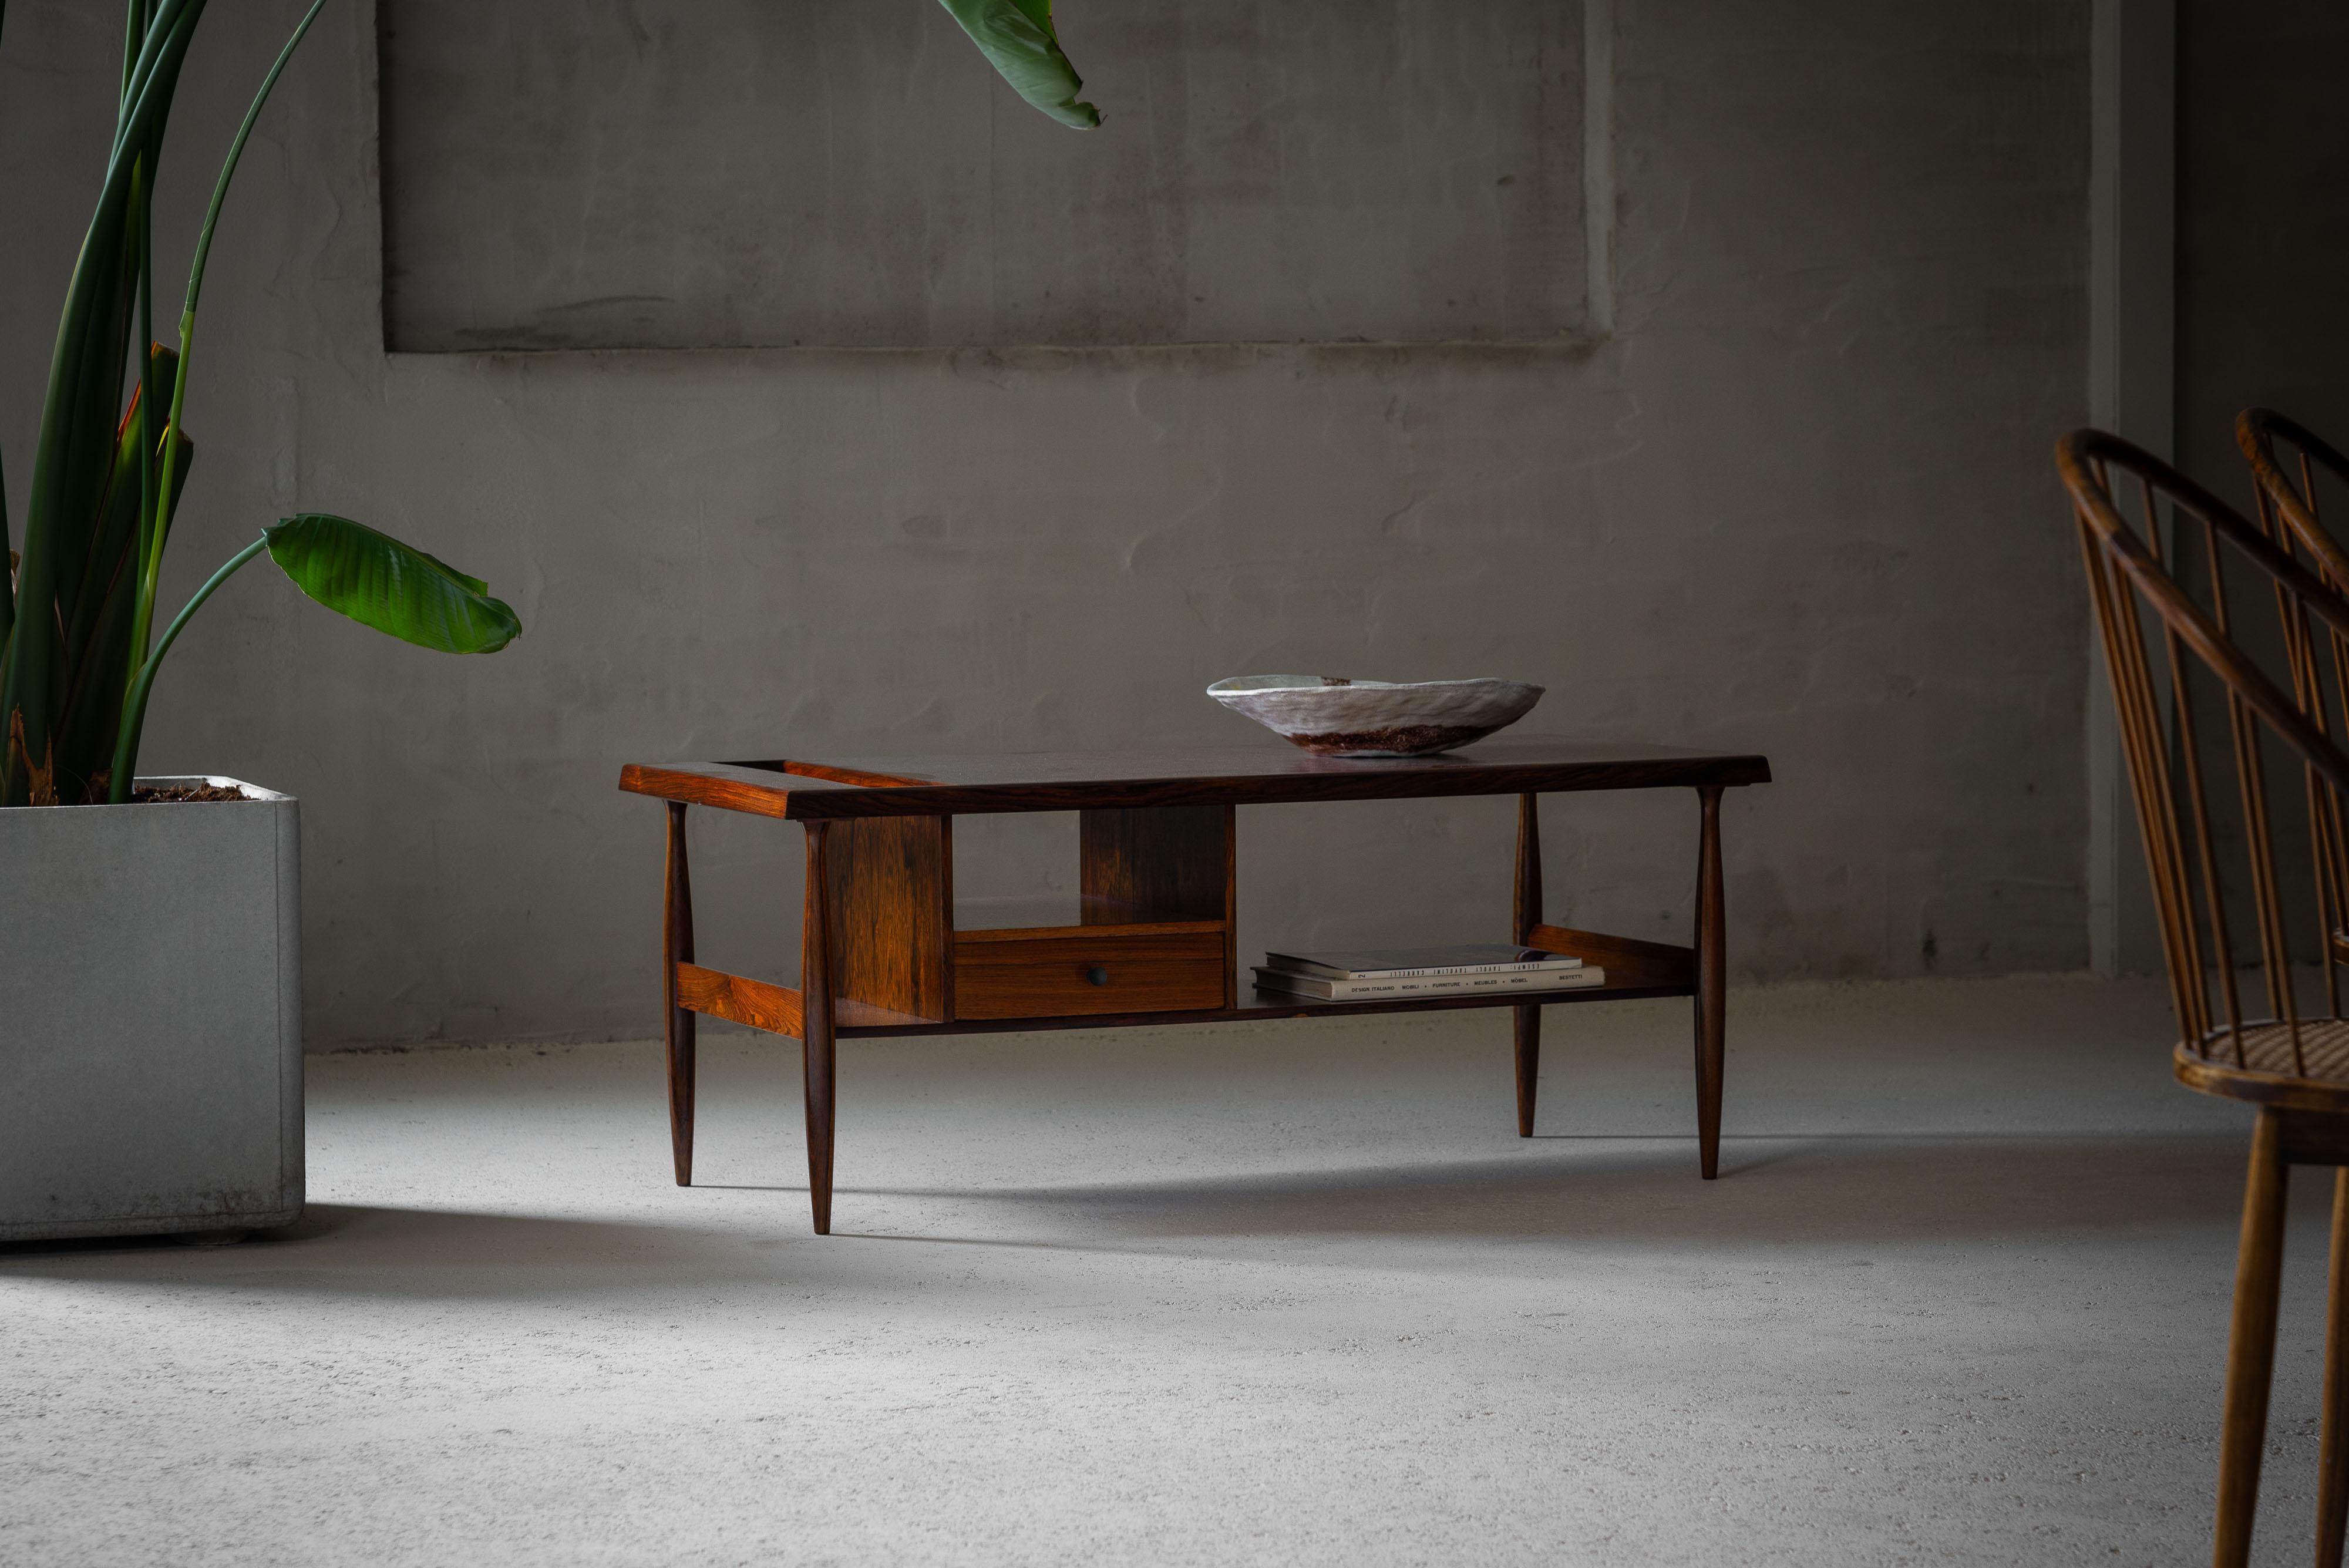 The Carlo Hauner Martin Eisler versatile table for Forma Italy in 1955, is a piece of furniture that embodies both functionality and style. With its adaptable design, this table seamlessly transitions between various roles, serving as a coffee